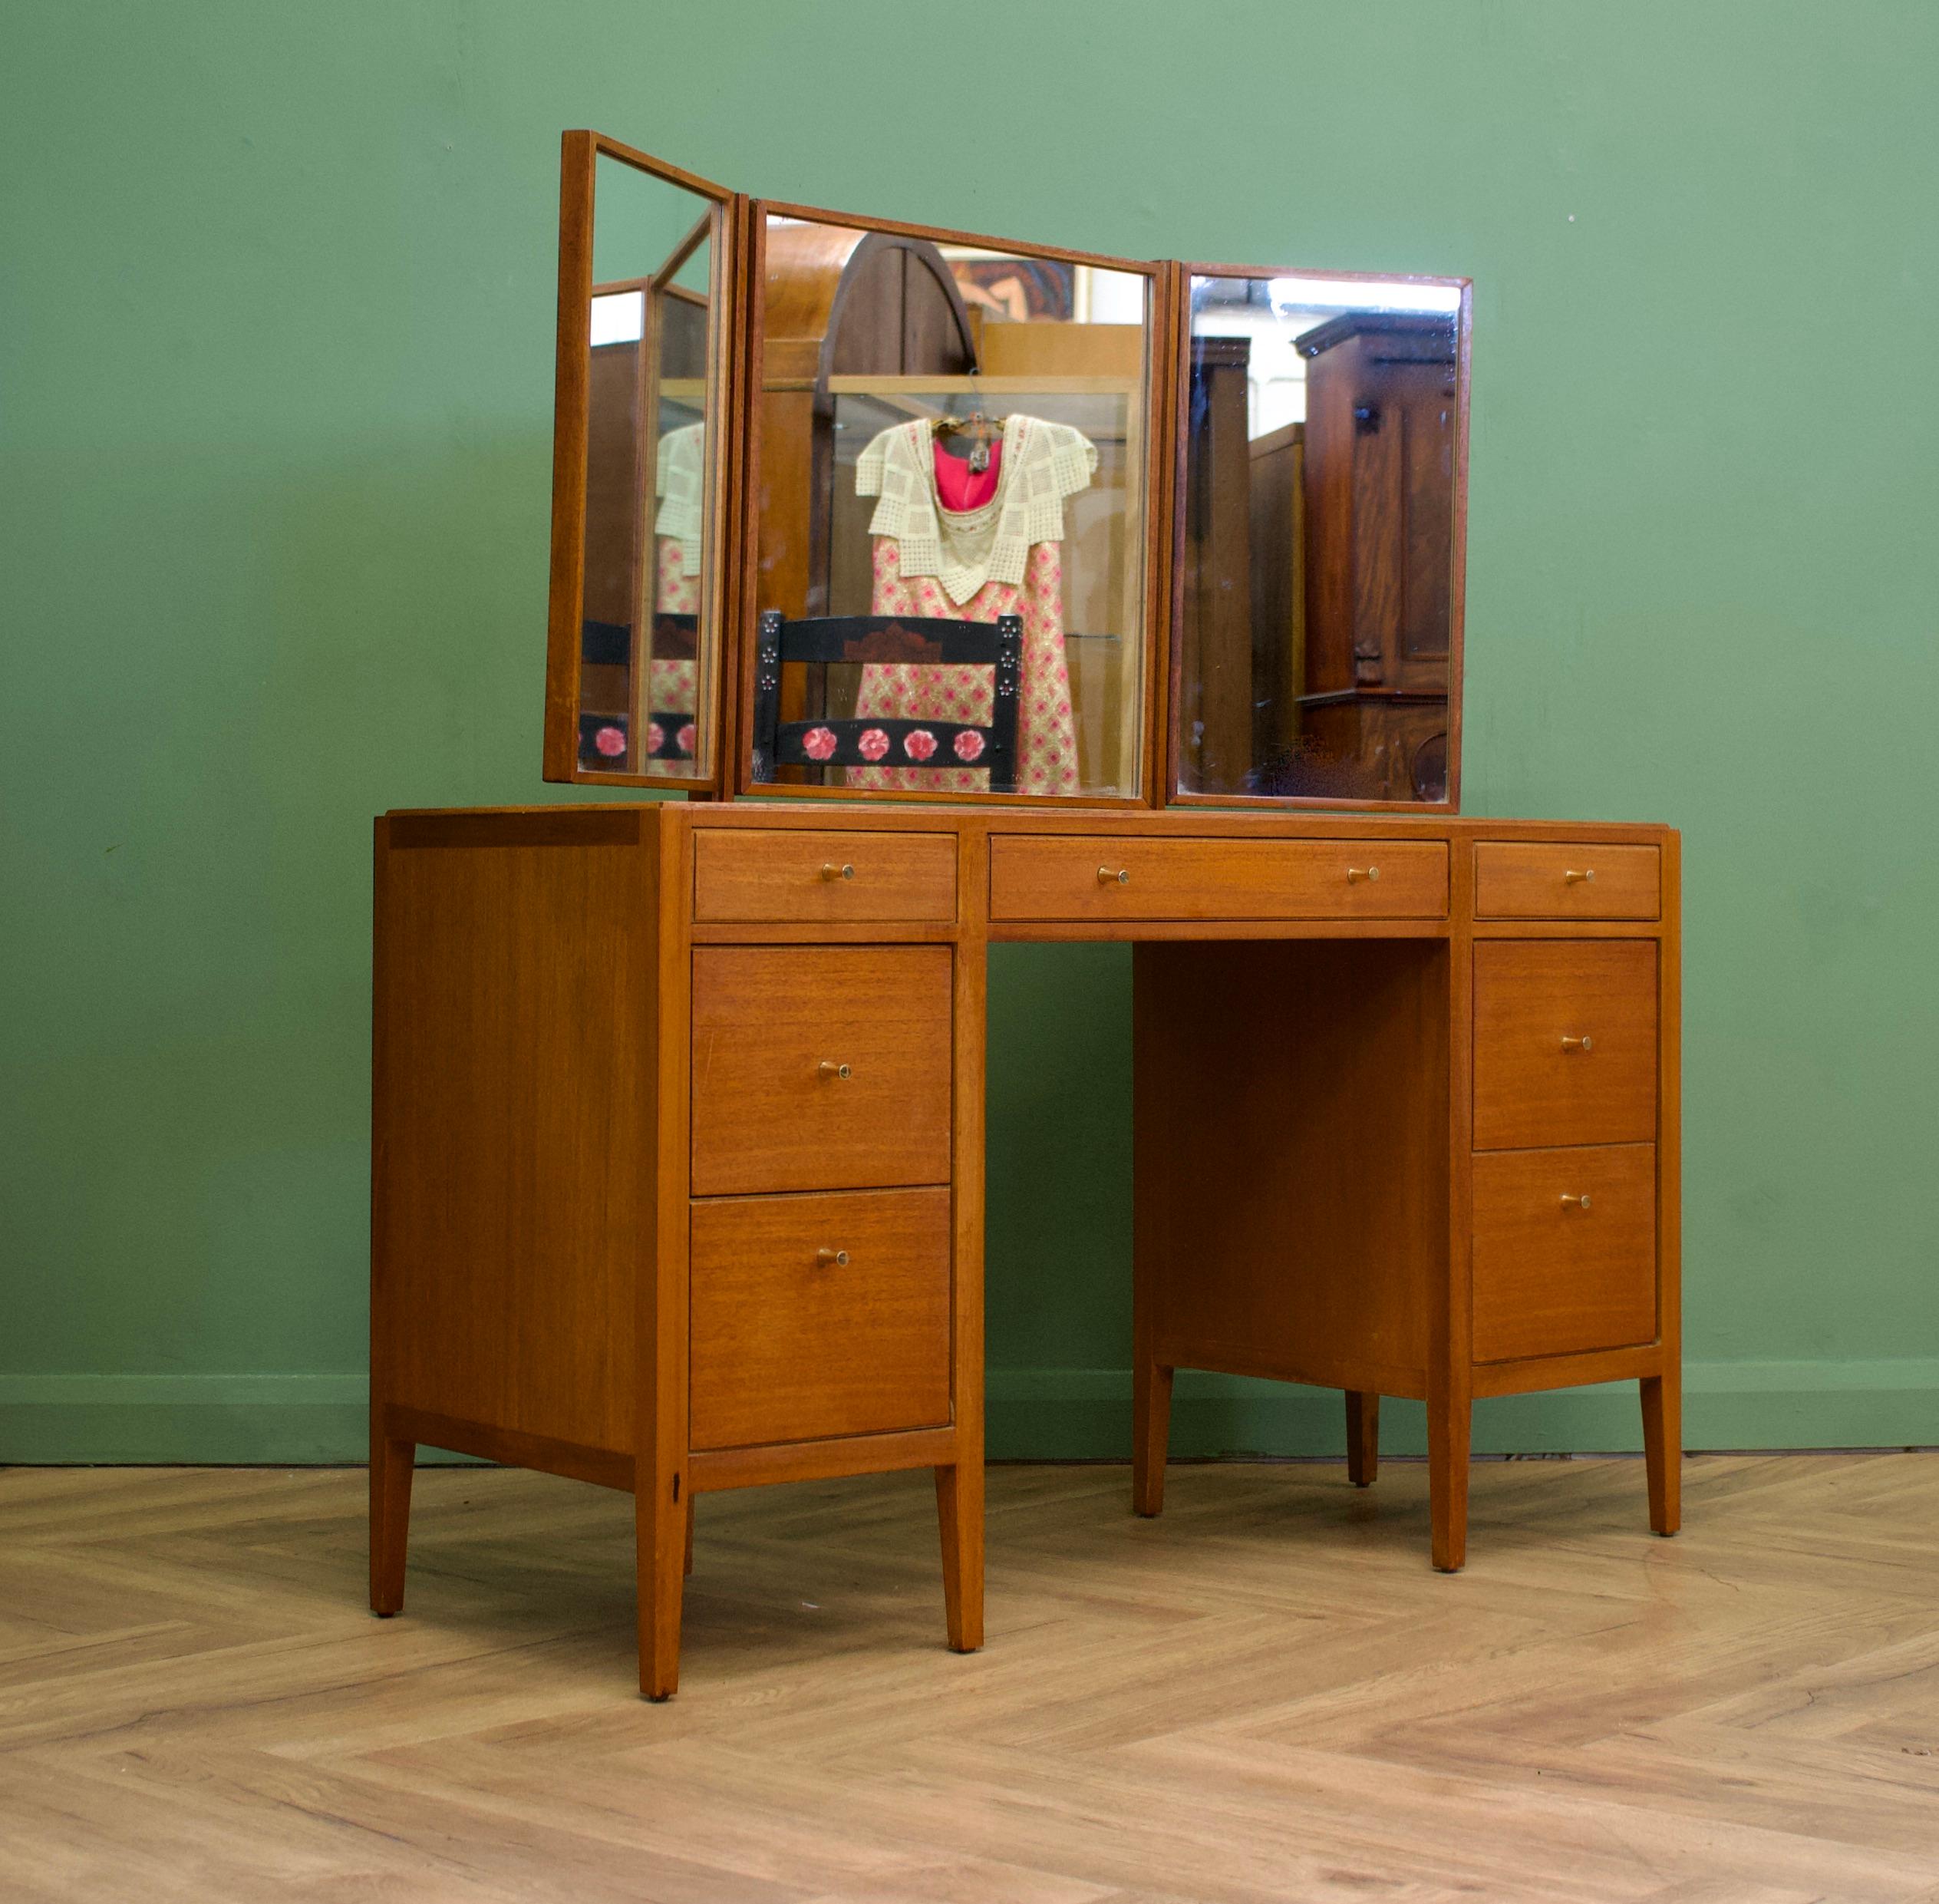 - Midcentury dressing table.
- Manufactured in the UK by Loughborough
- Retailed through the department store Heals, during the 1960s
- Made from Teak & Teak Veneer.

- Featuring 7 drawers and a triptych mirror.